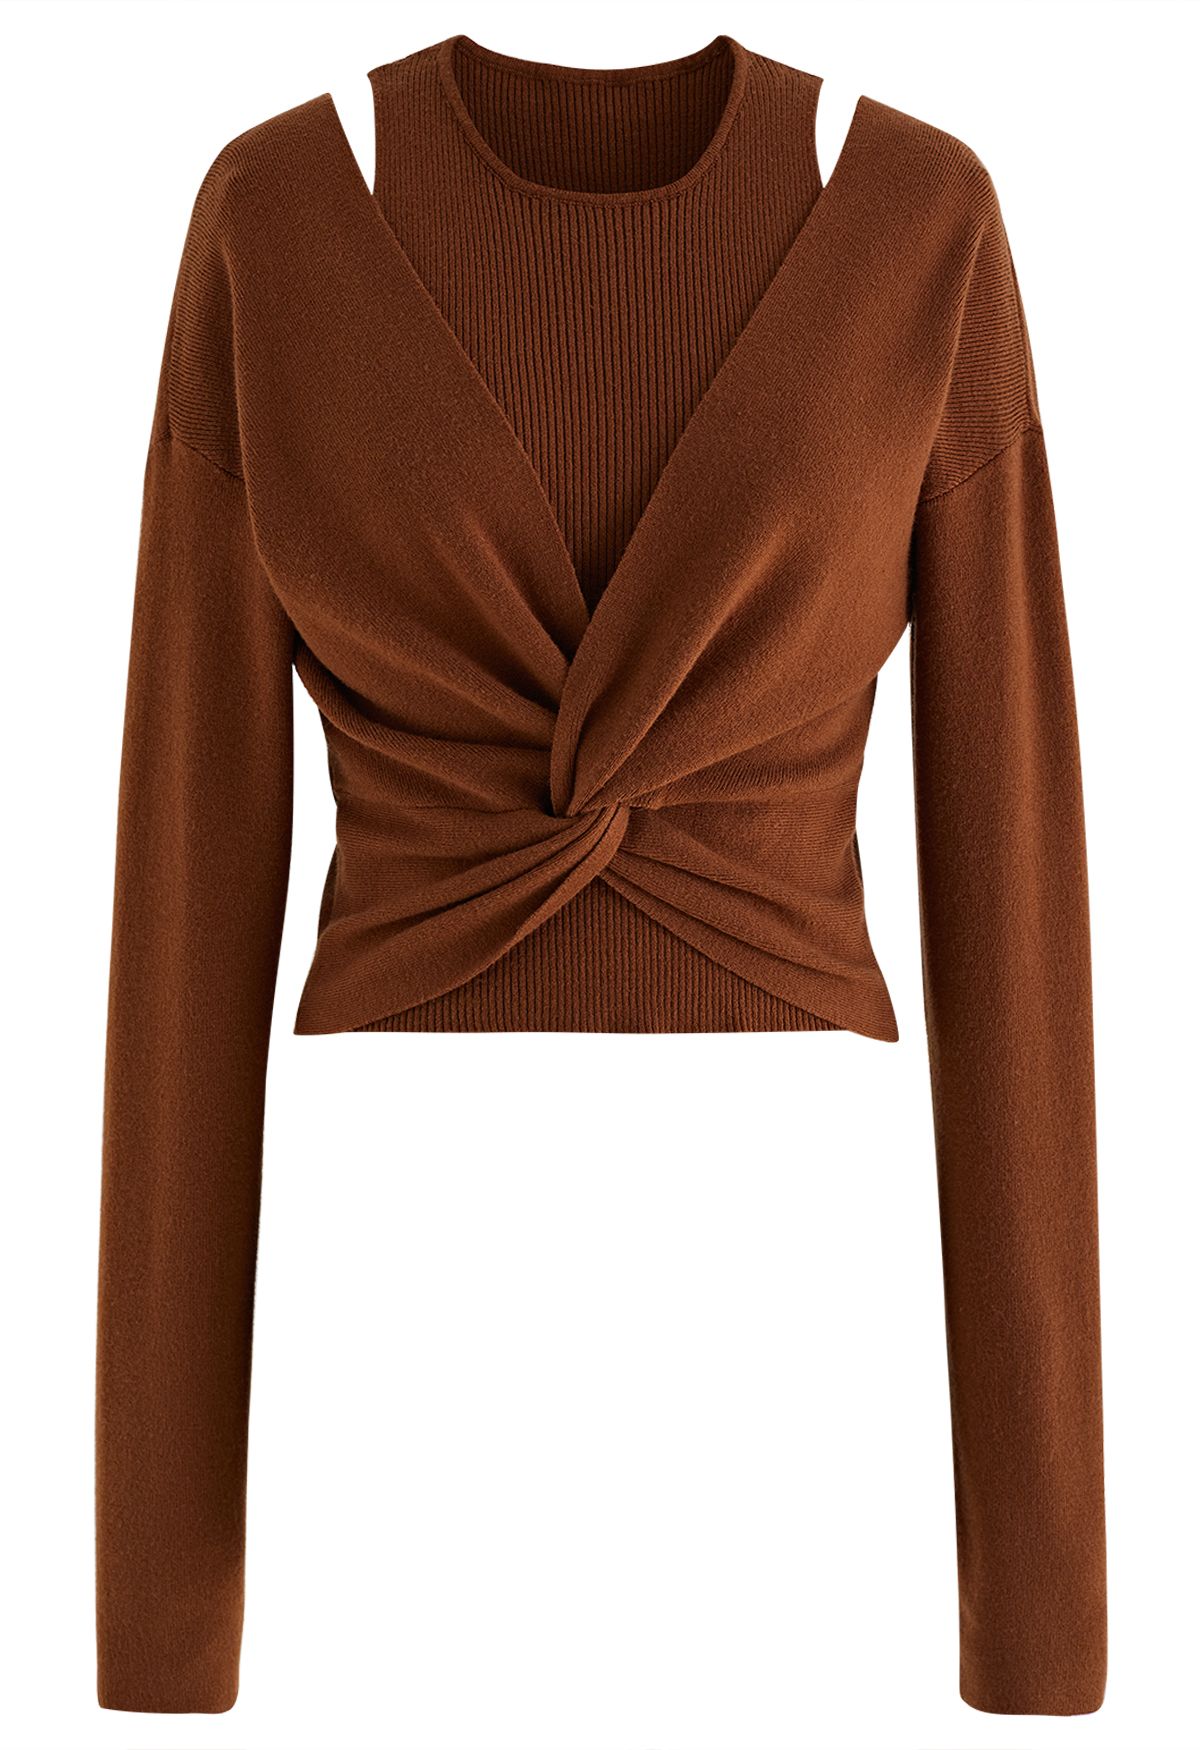 Twist Front Faux Two-Piece Knit Top in Caramel - Retro, Indie and ...